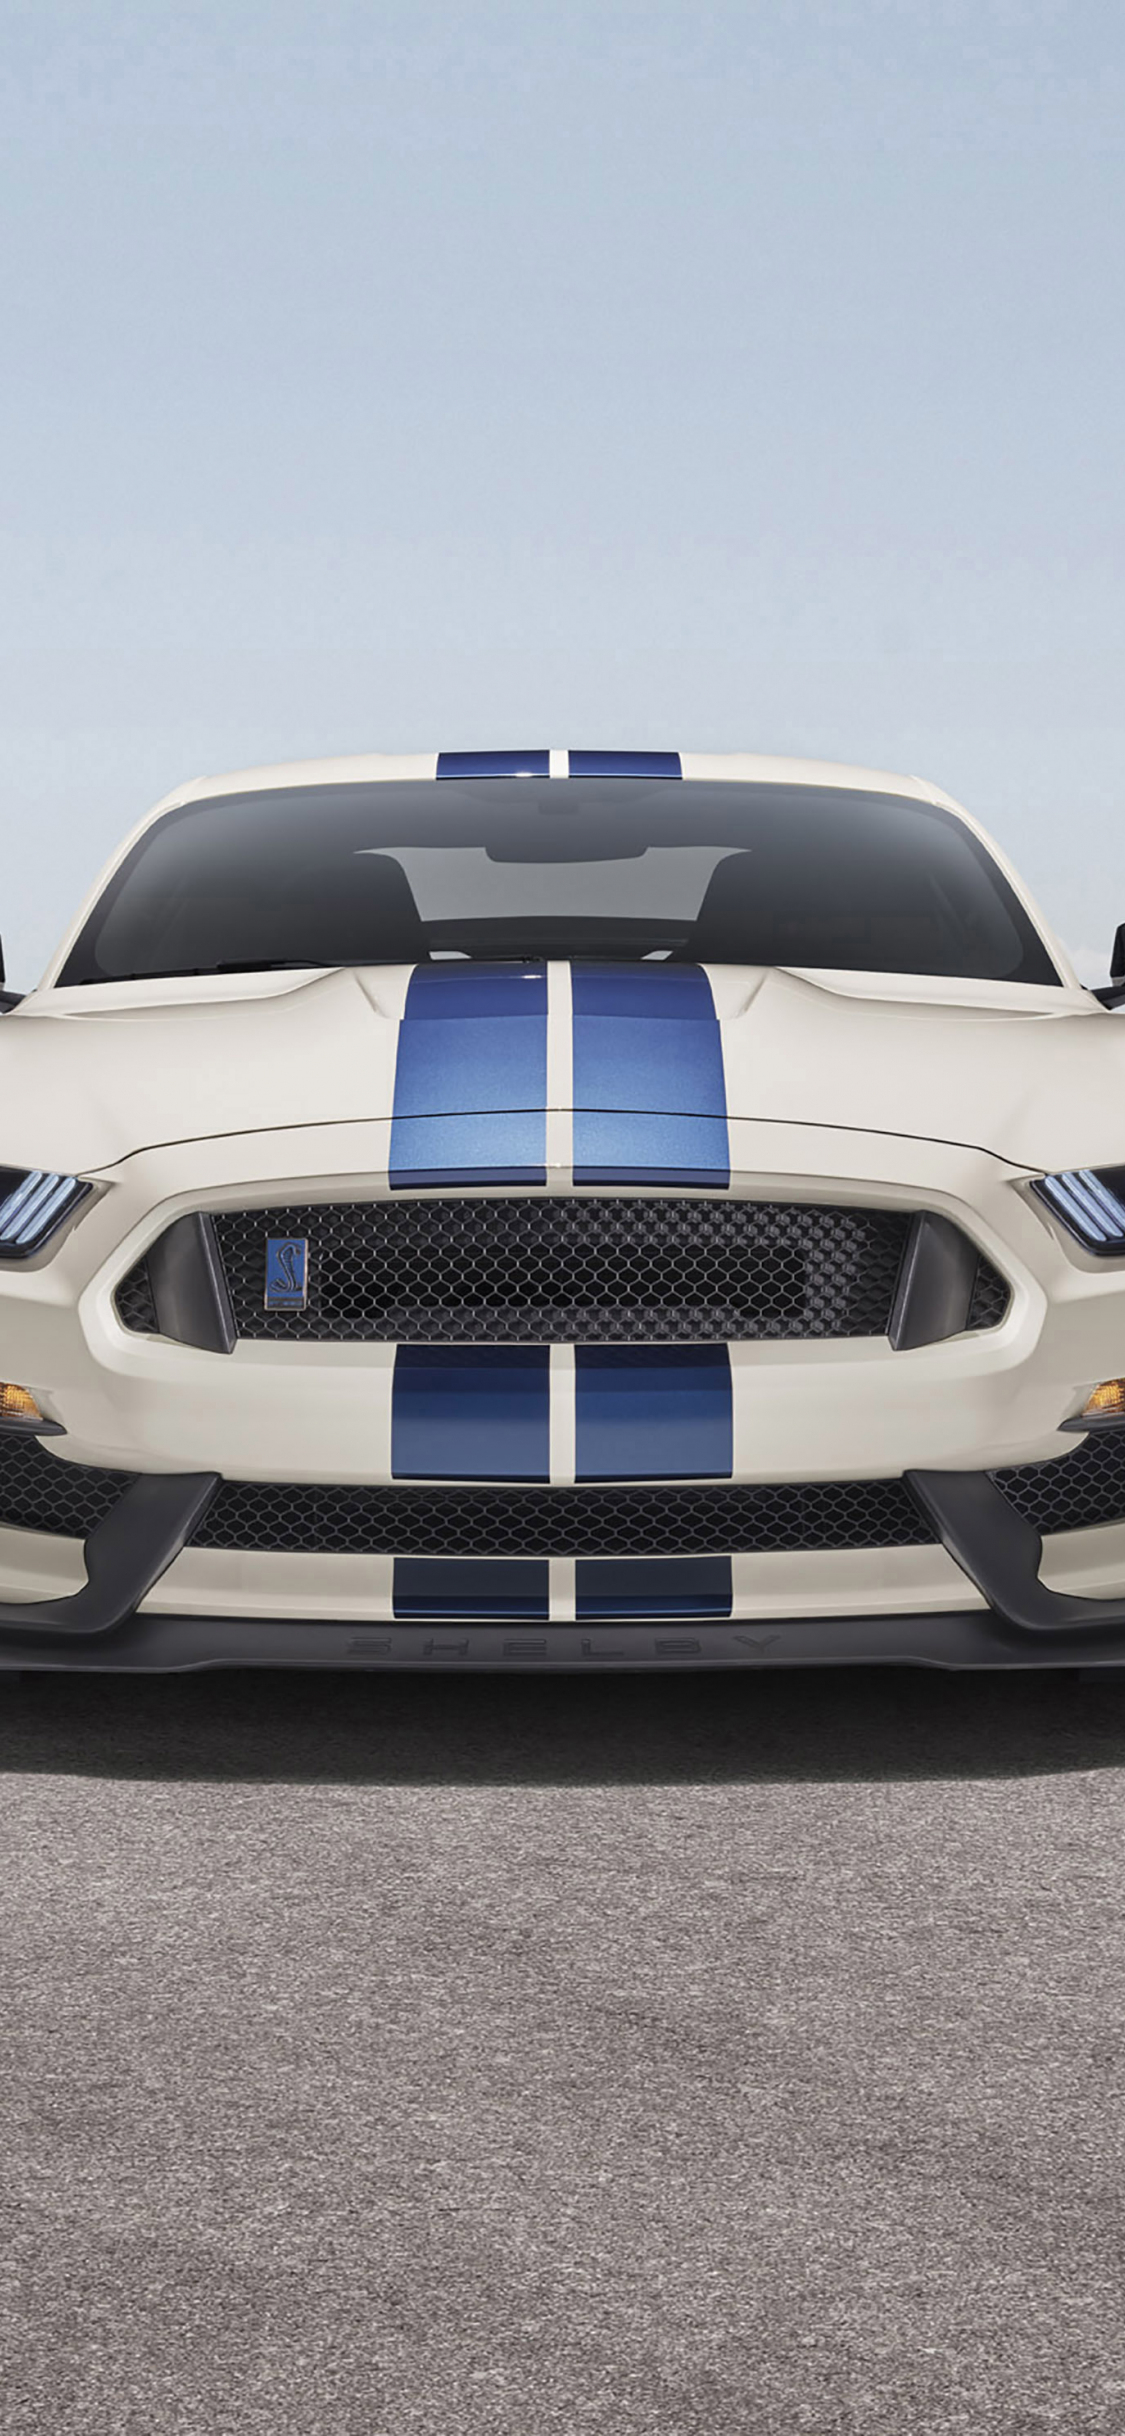 1125x2436 Download wallpaper white ford mustang shelby gt350, iphone x, hd background, 23670